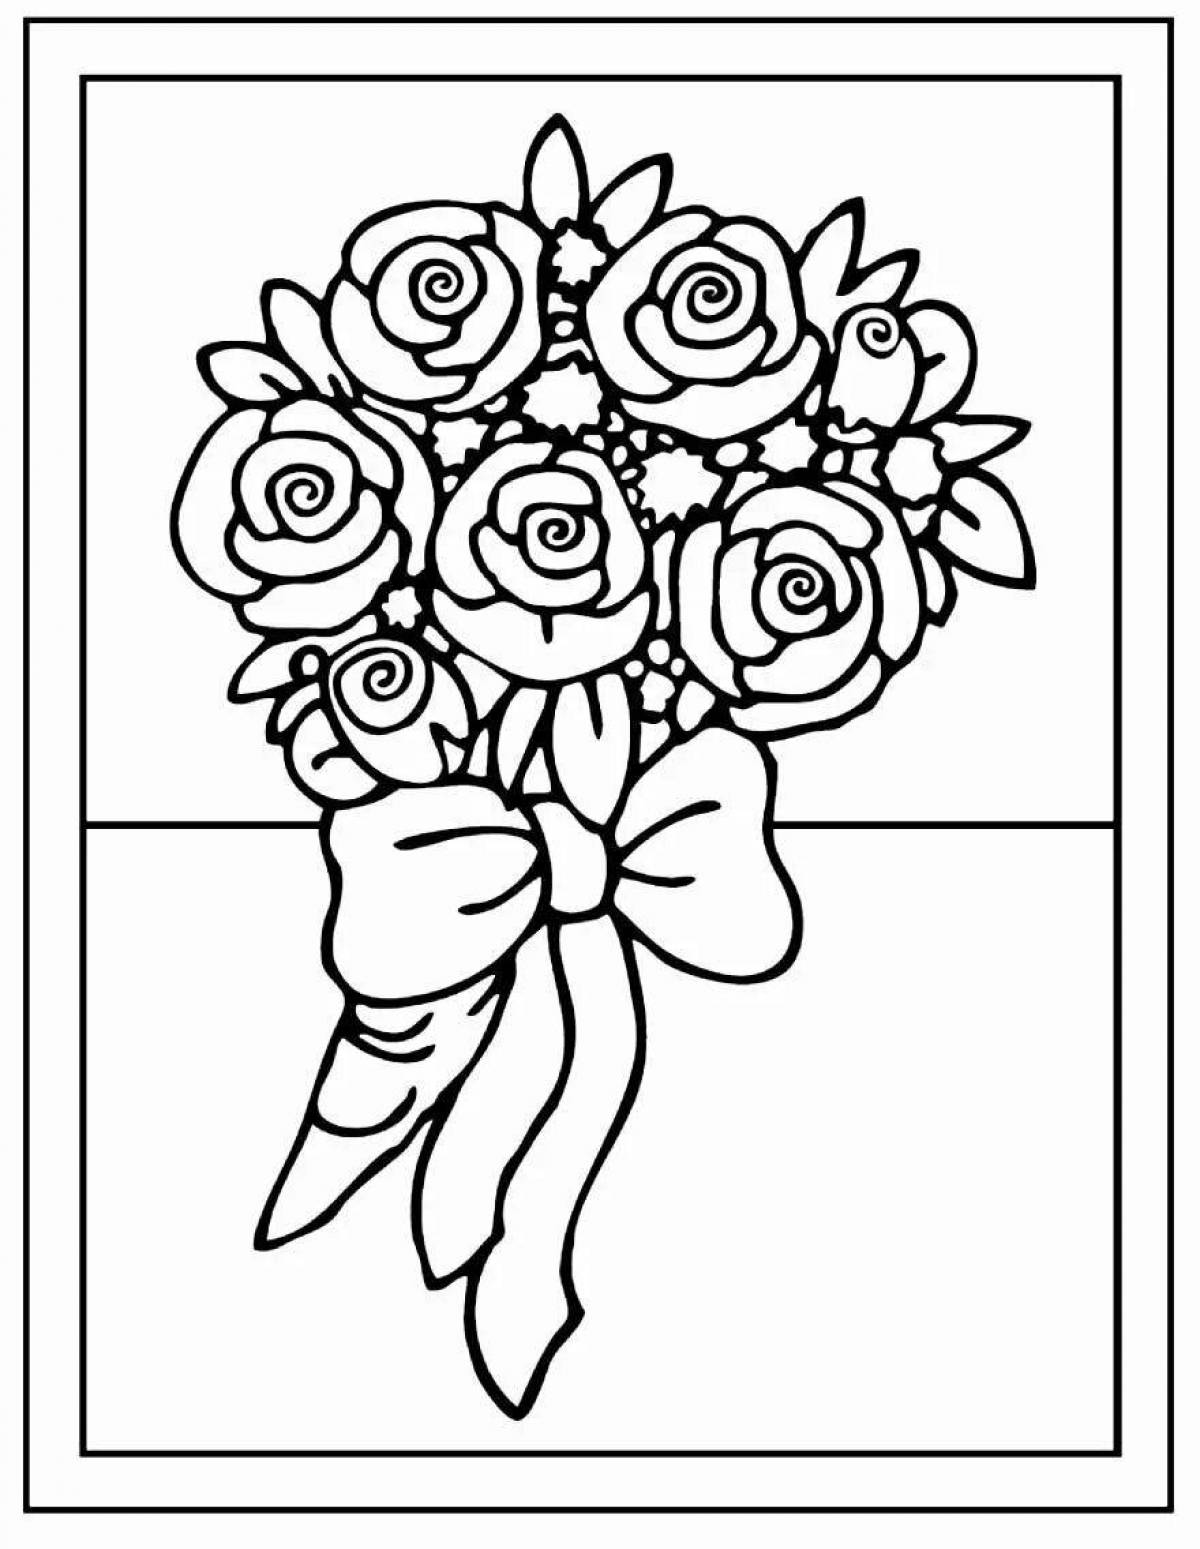 Awesome happy birthday coloring pages with roses